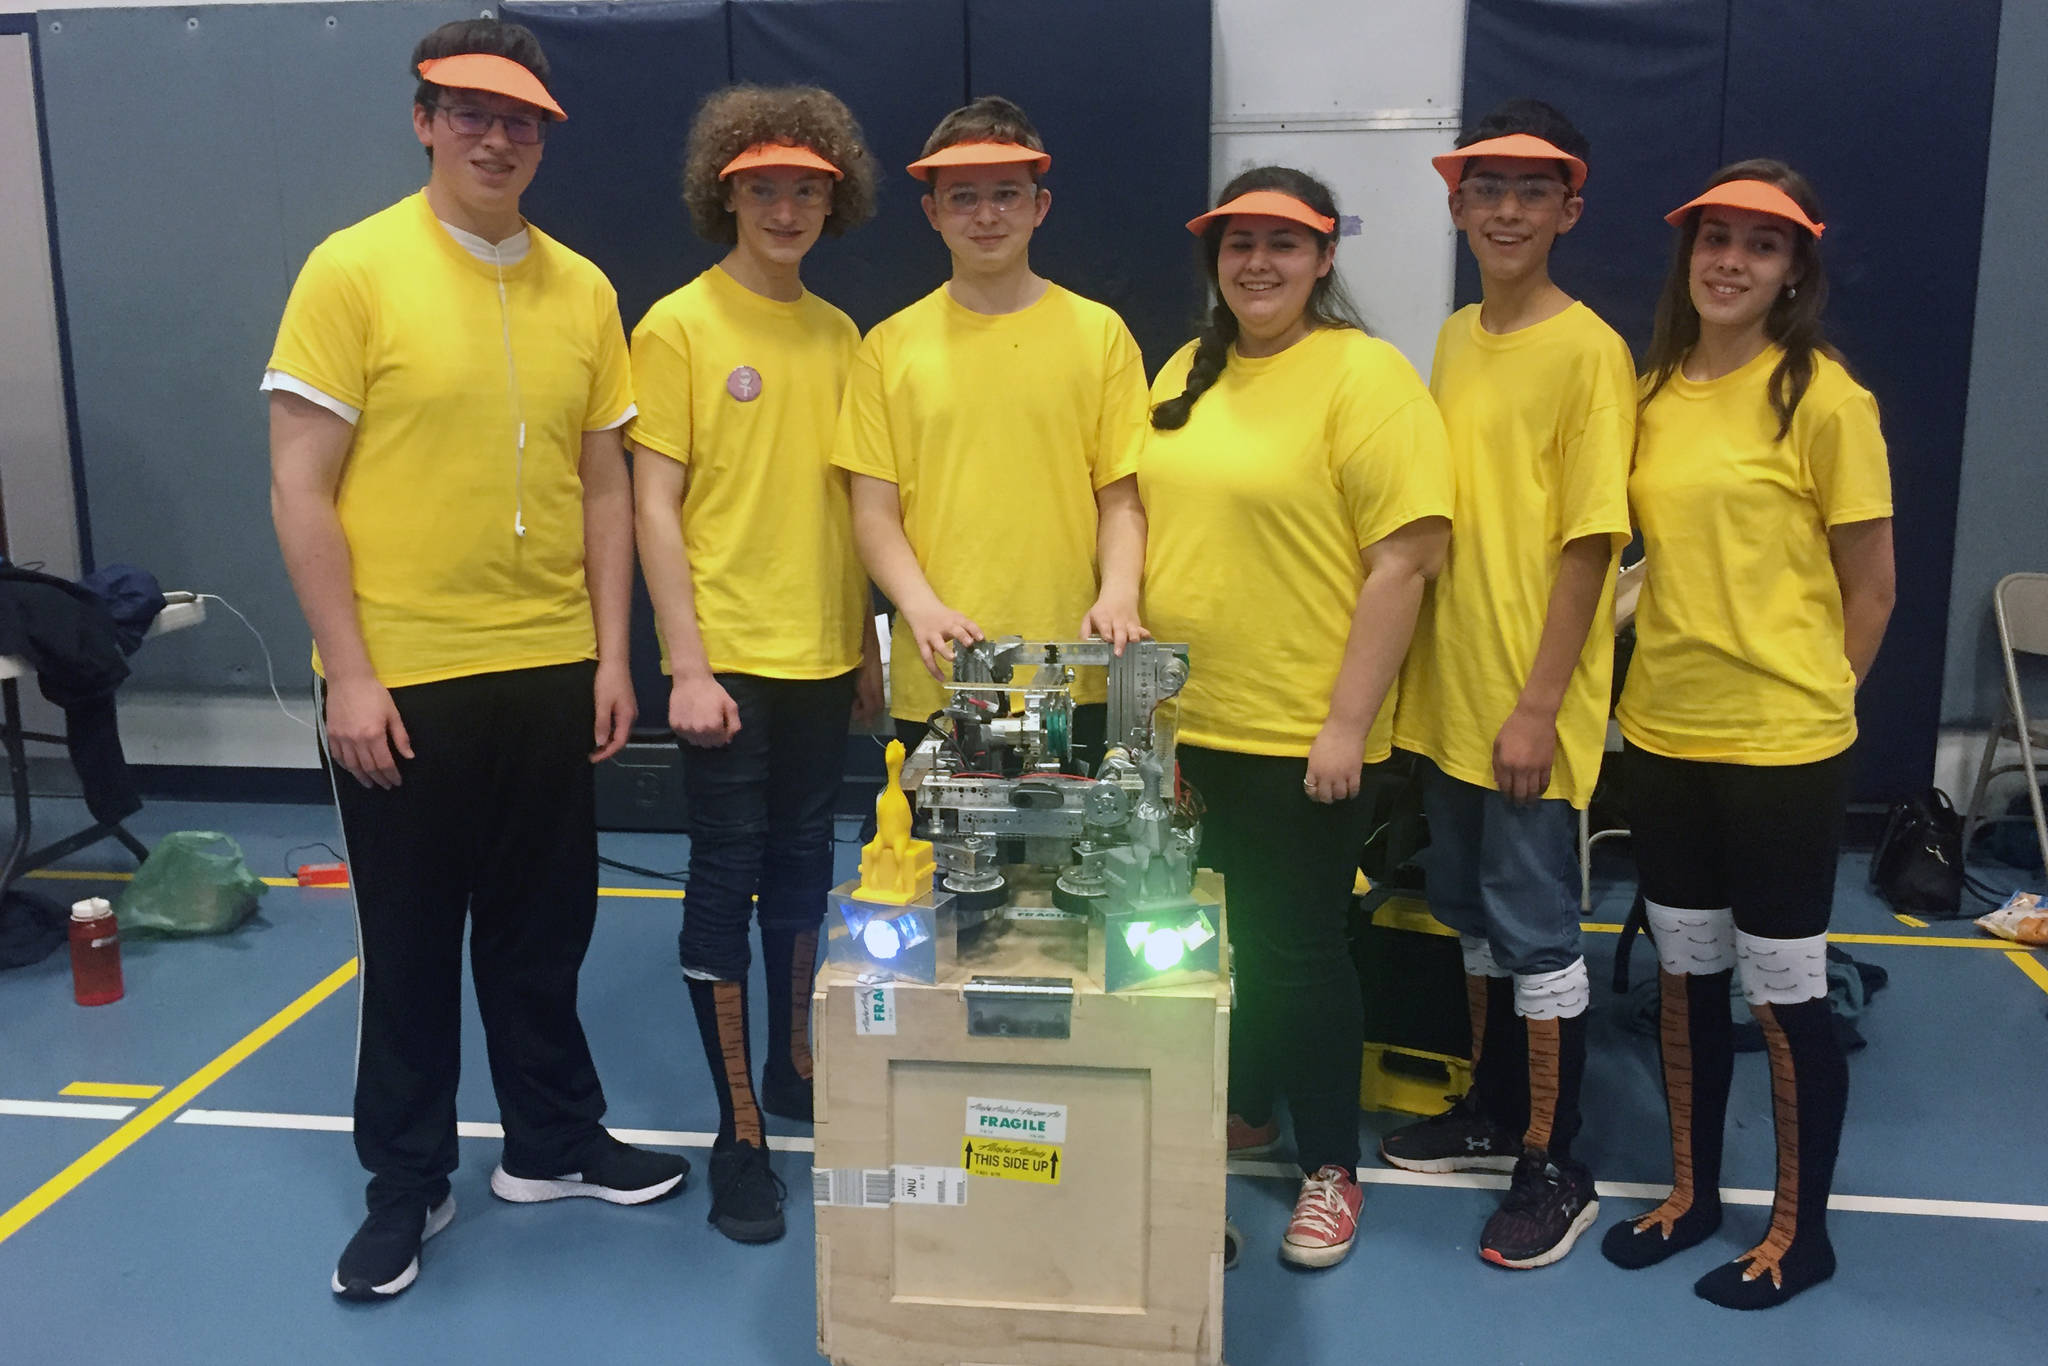 “Chain Reaction” of Thunder Mountain High School poses with its robot after winning the top honor at the Southeast Regional Qualifier Tournament at TMHS on Saturday, Dec. 7, 2019. From left to right: Johnny Barnhill, Remington Wiley, Keelan Cunningham, Hailee Cunningham, Benjamin Gho, Corinne Rather. (Nolin Ainsworth | Juneau Empire)